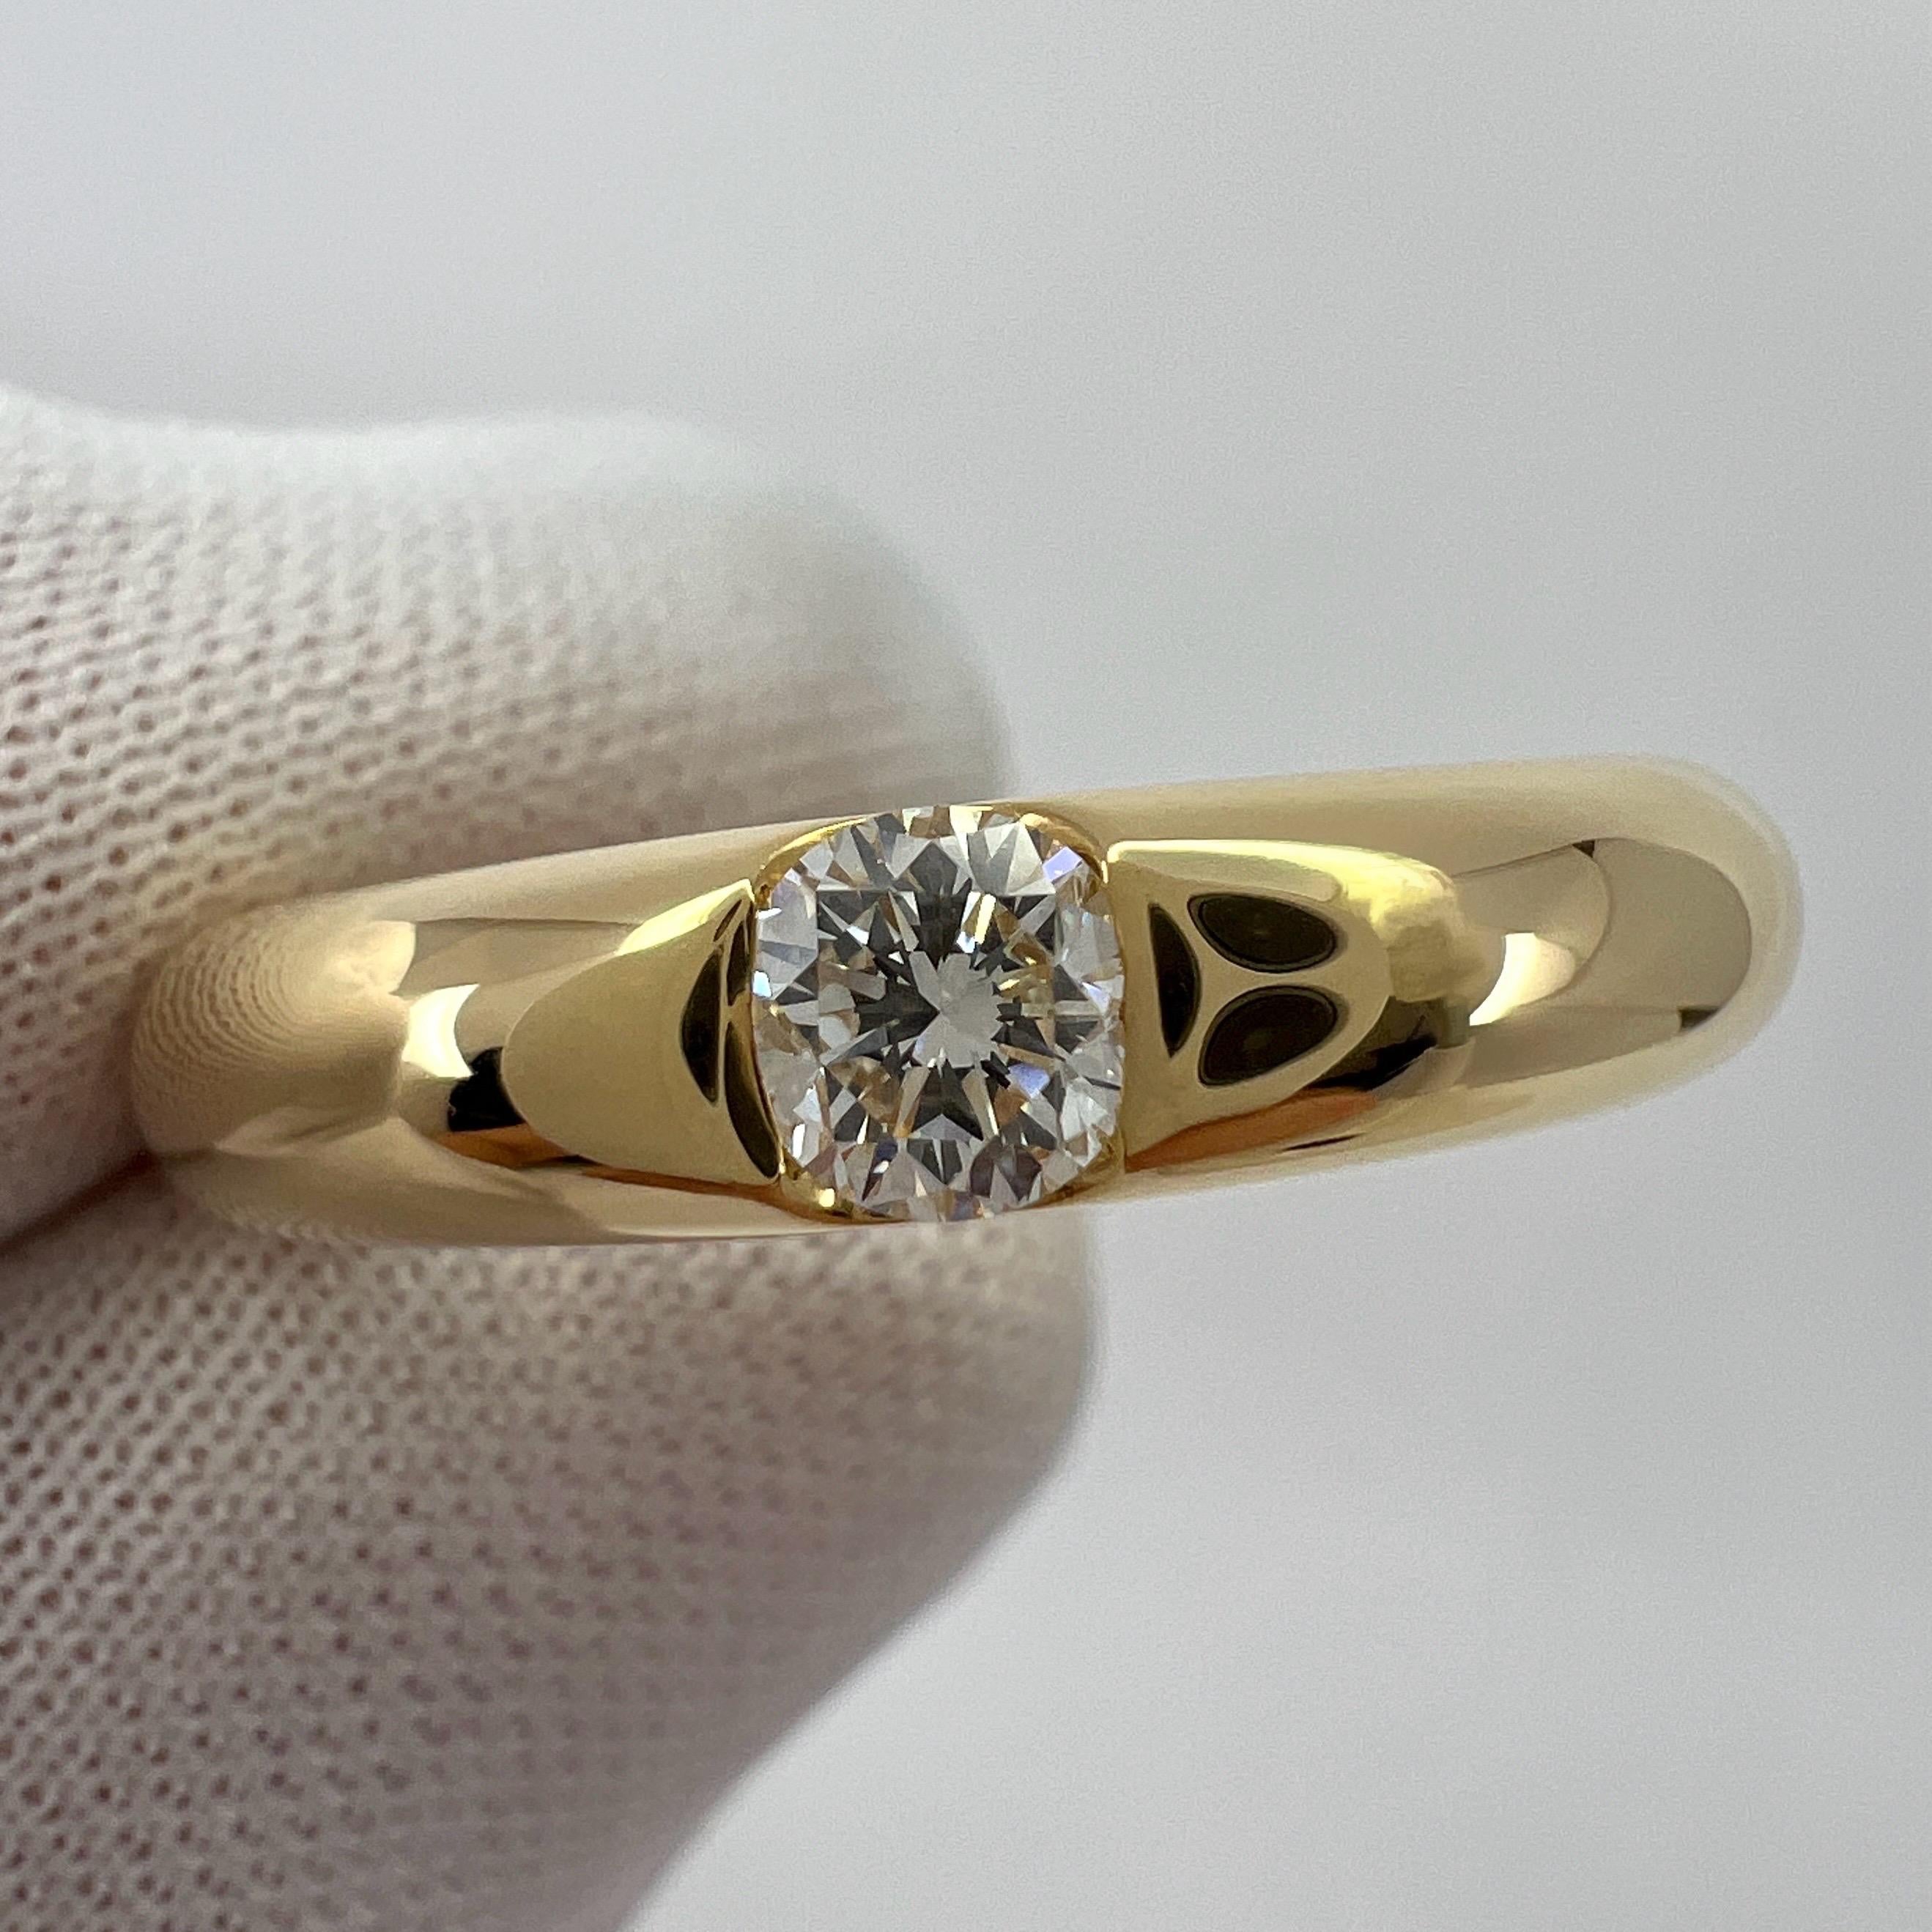 Round Cut Vintage Cartier Round Diamond Ellipse 18k Yellow Gold Solitaire Band Ring US5 49